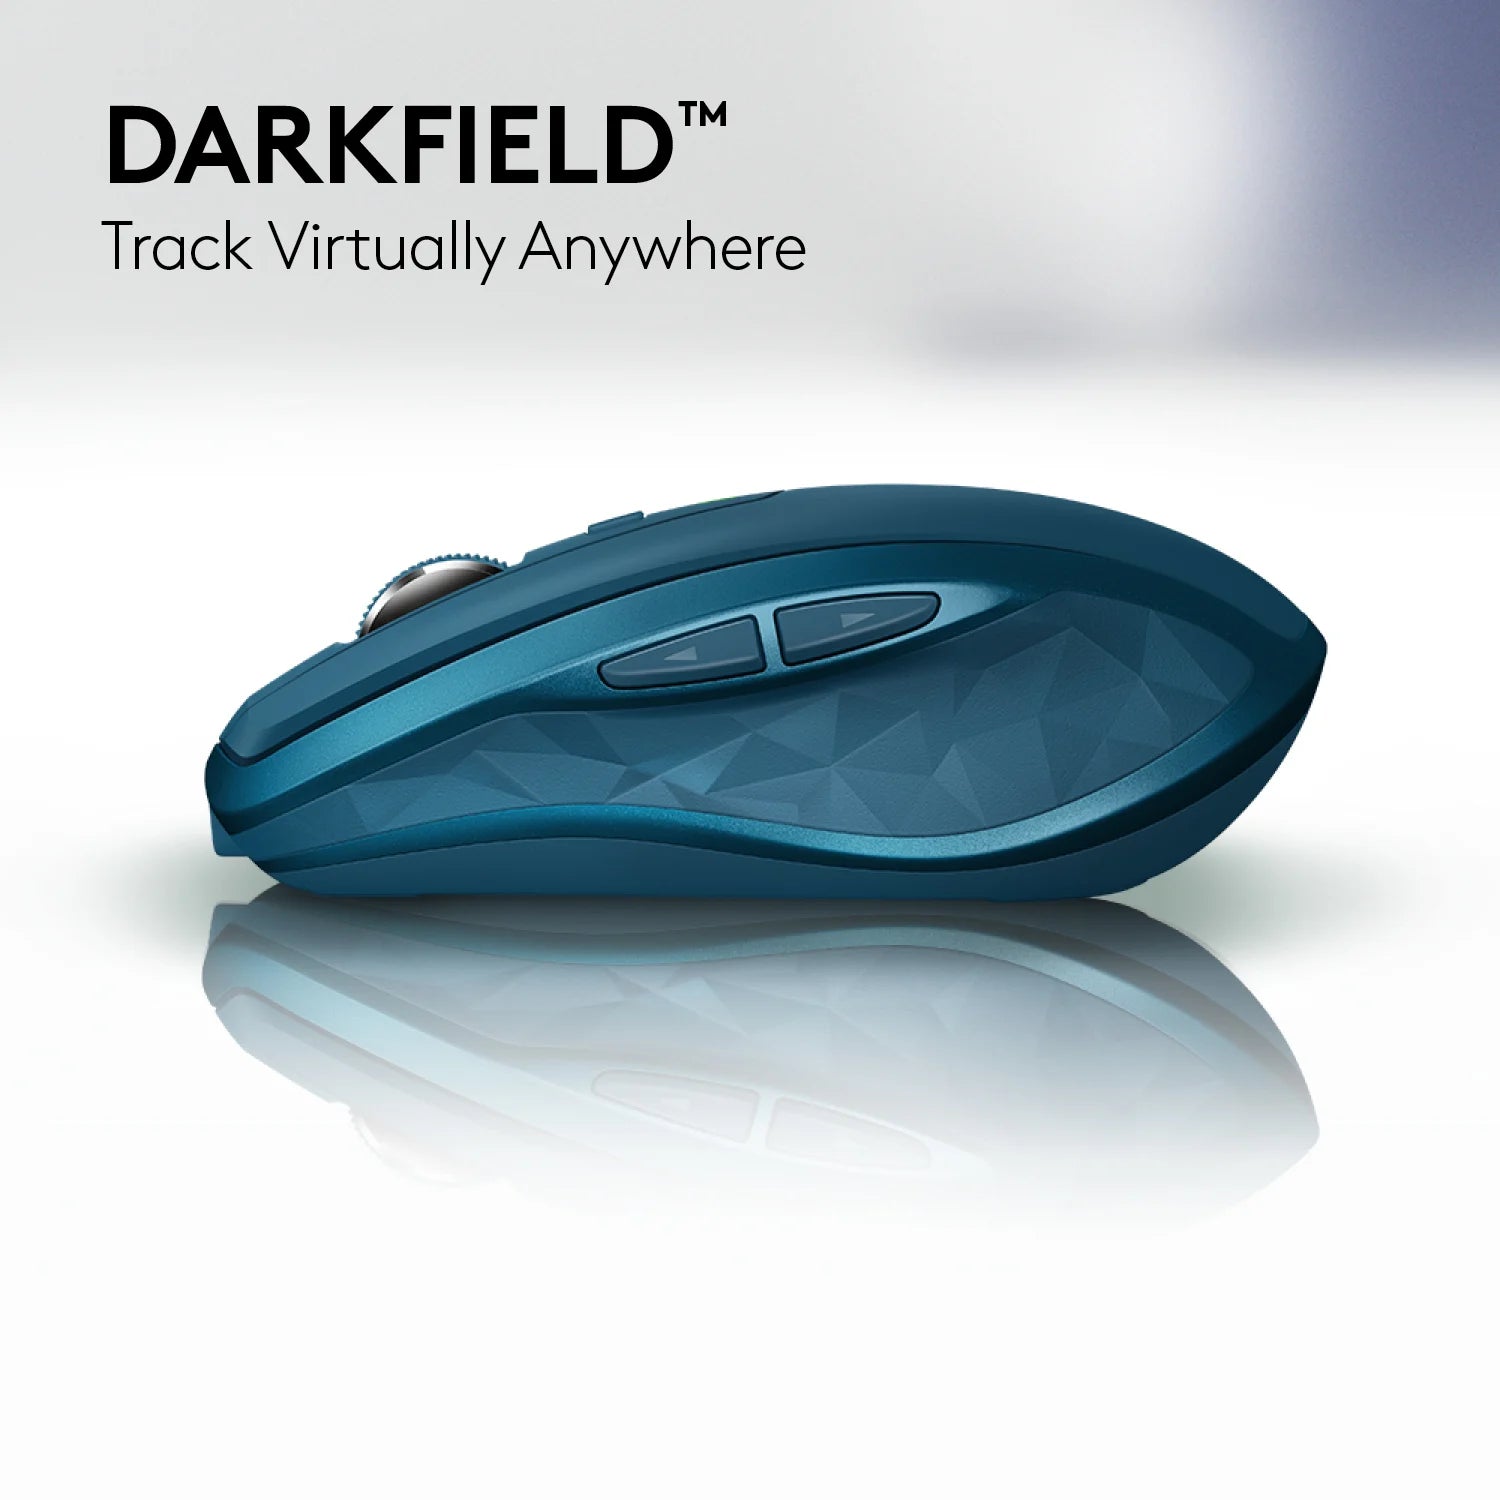 Logitech MX Anywhere 2S Wireless Mouse | Color Midnight Teal | Best Computer Accessories in Bahrain | Halabh